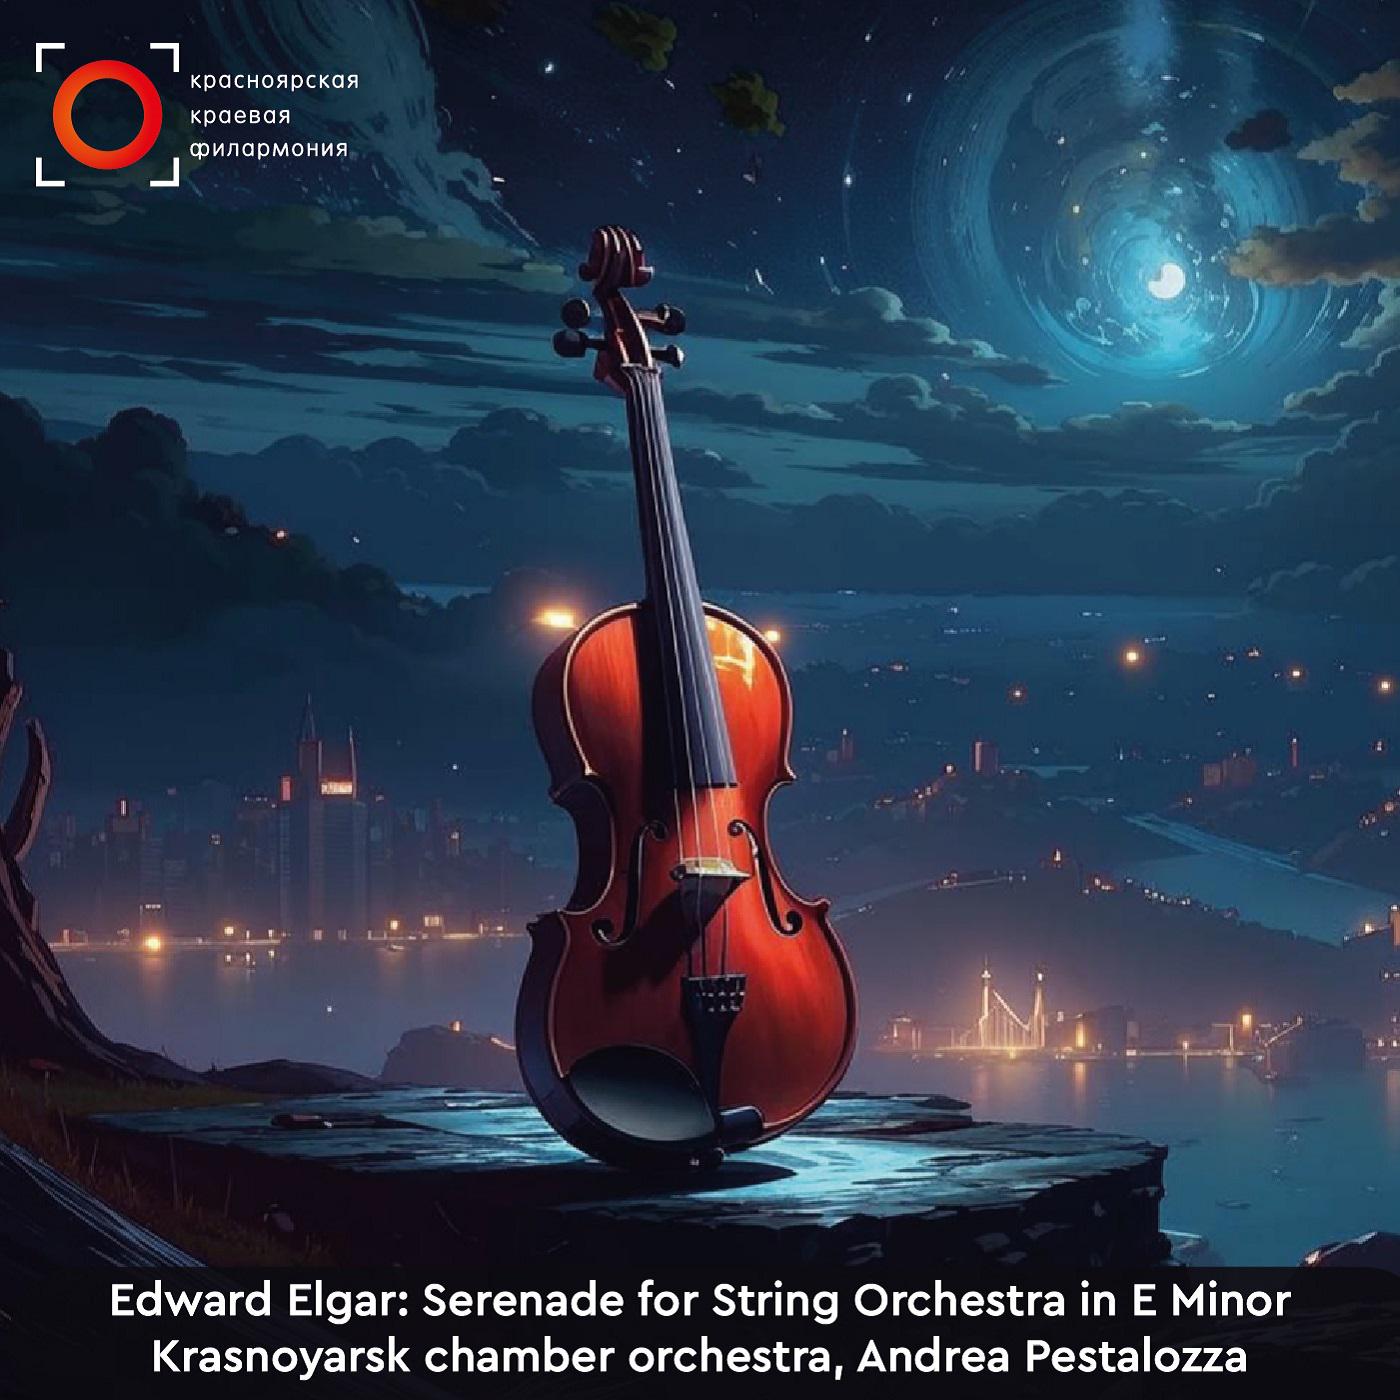 Serenade for String Orchestra in E Minor, Op. 20, IEE 69